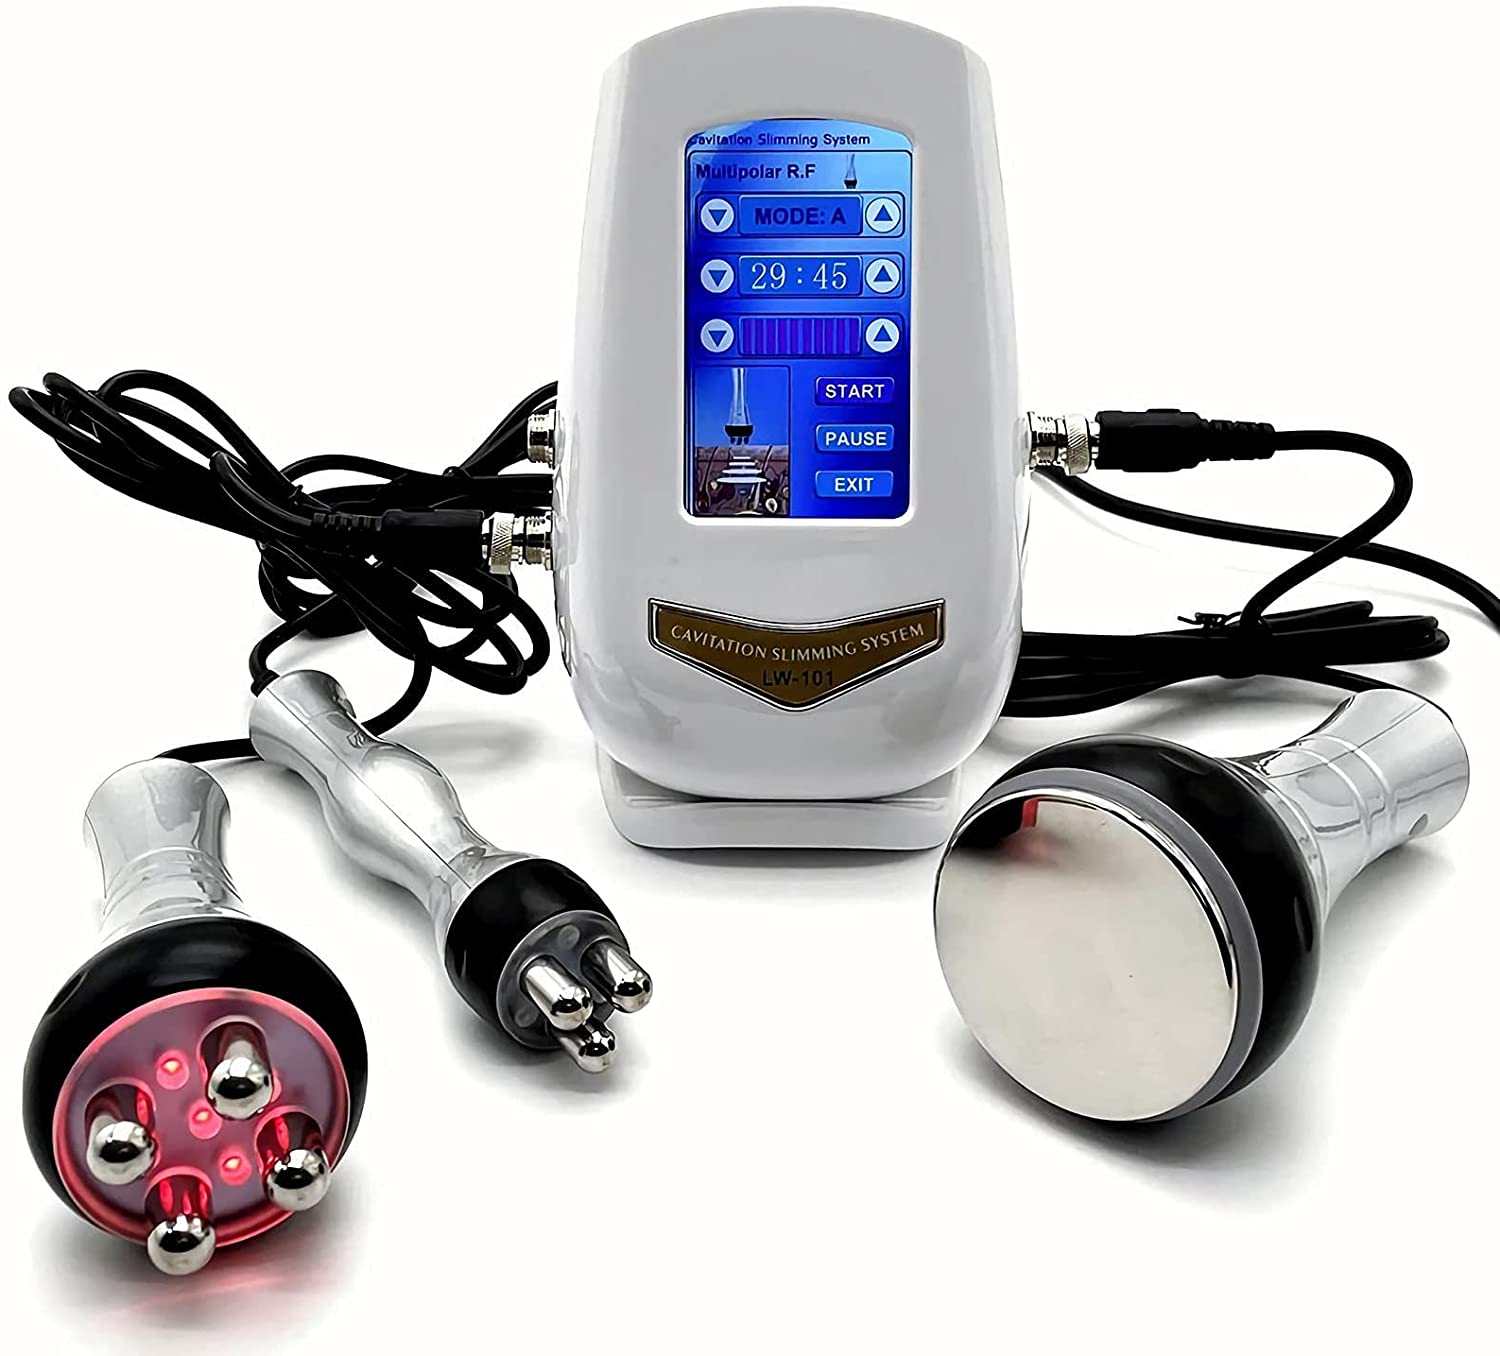 Ultrasionc Beauty Skin Care Weight Loss 40K Vacuum Cavitation System Cellulite Removal Rf Body Slimming Machine插图4